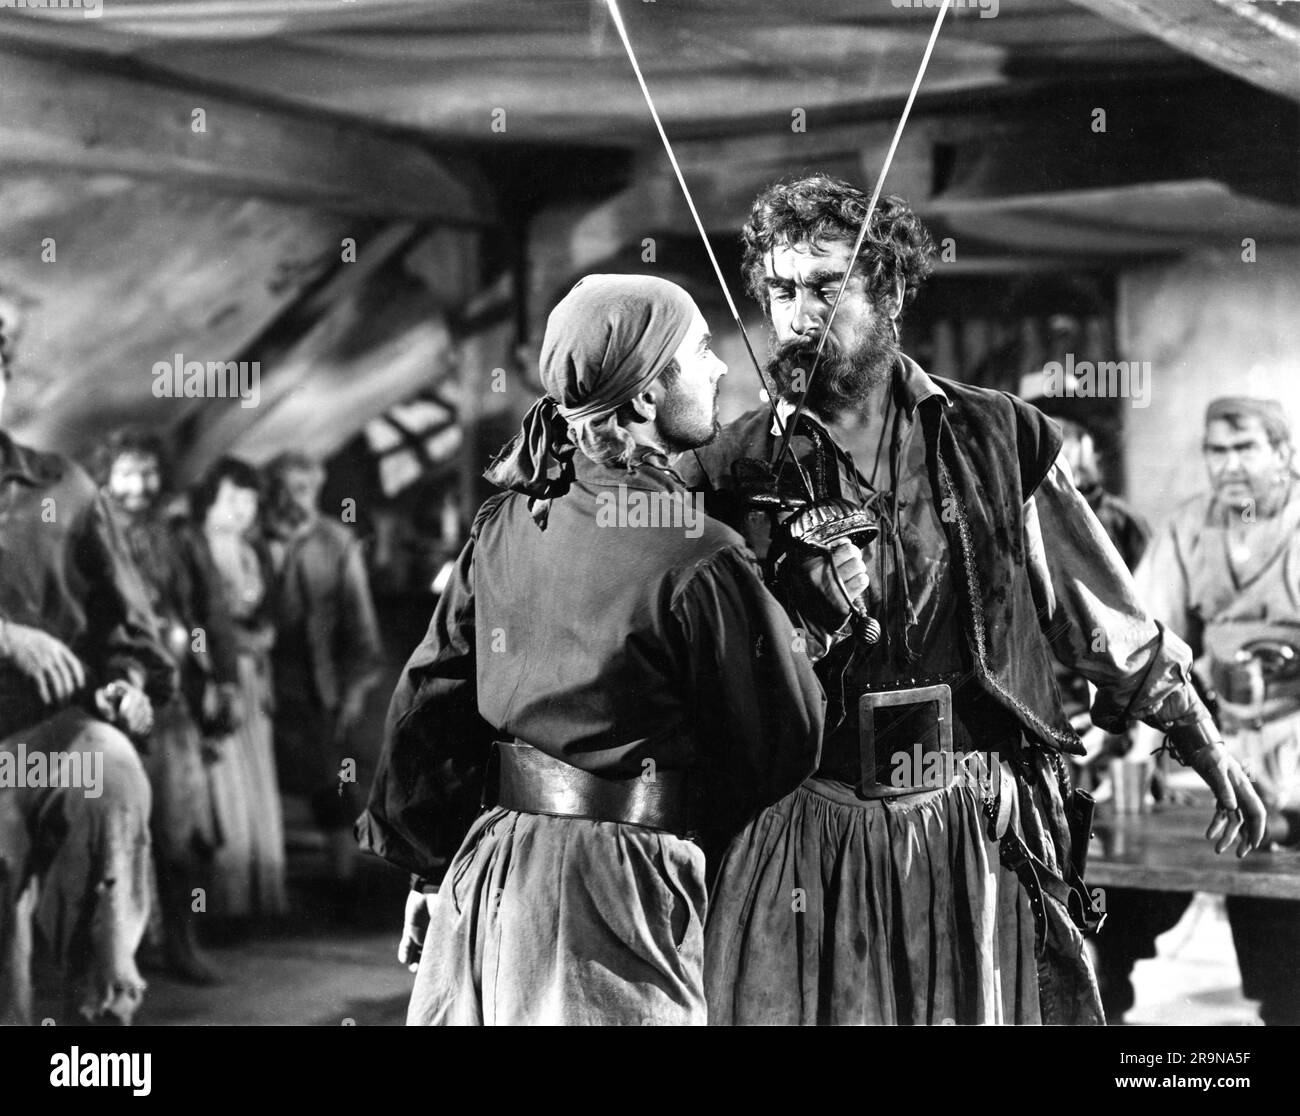 TYRONE POWER GEORGE SANDERS and THOMAS MITCHELL in THE BLACK SWAN 1942 director HENRY KOING novel Rafael Sabatini screenplay Ben Hecht and Seton I. Miller costumes Earl Luick music Alfred Newman Twentieth Century Fox Stock Photo